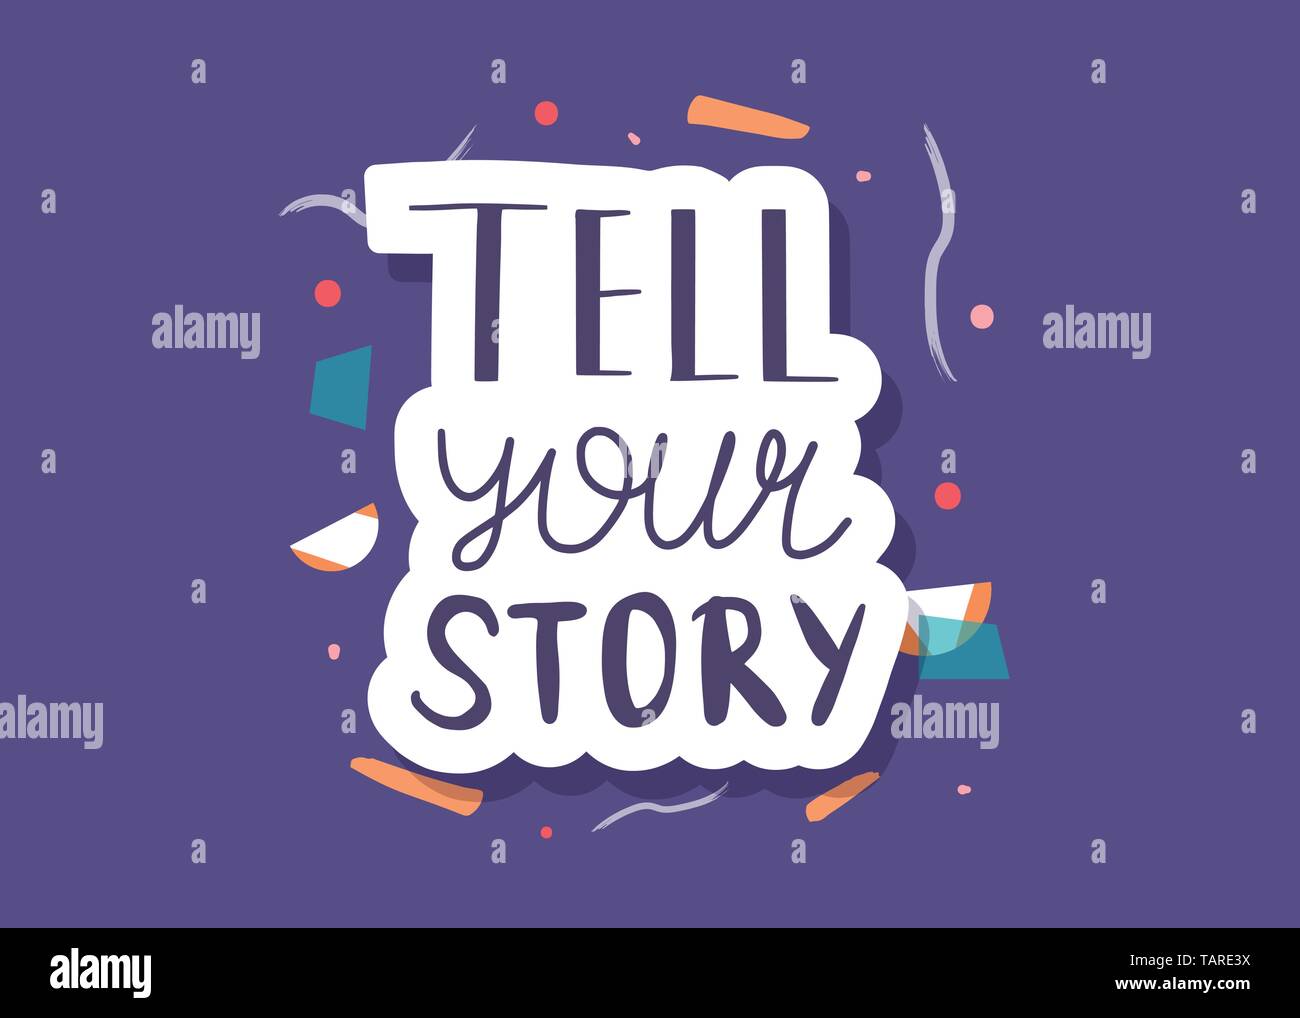 Tell Your Story Handwritten Lettering With Decoration Poster Vector Template With Quote Color Illustration Stock Vector Image Art Alamy